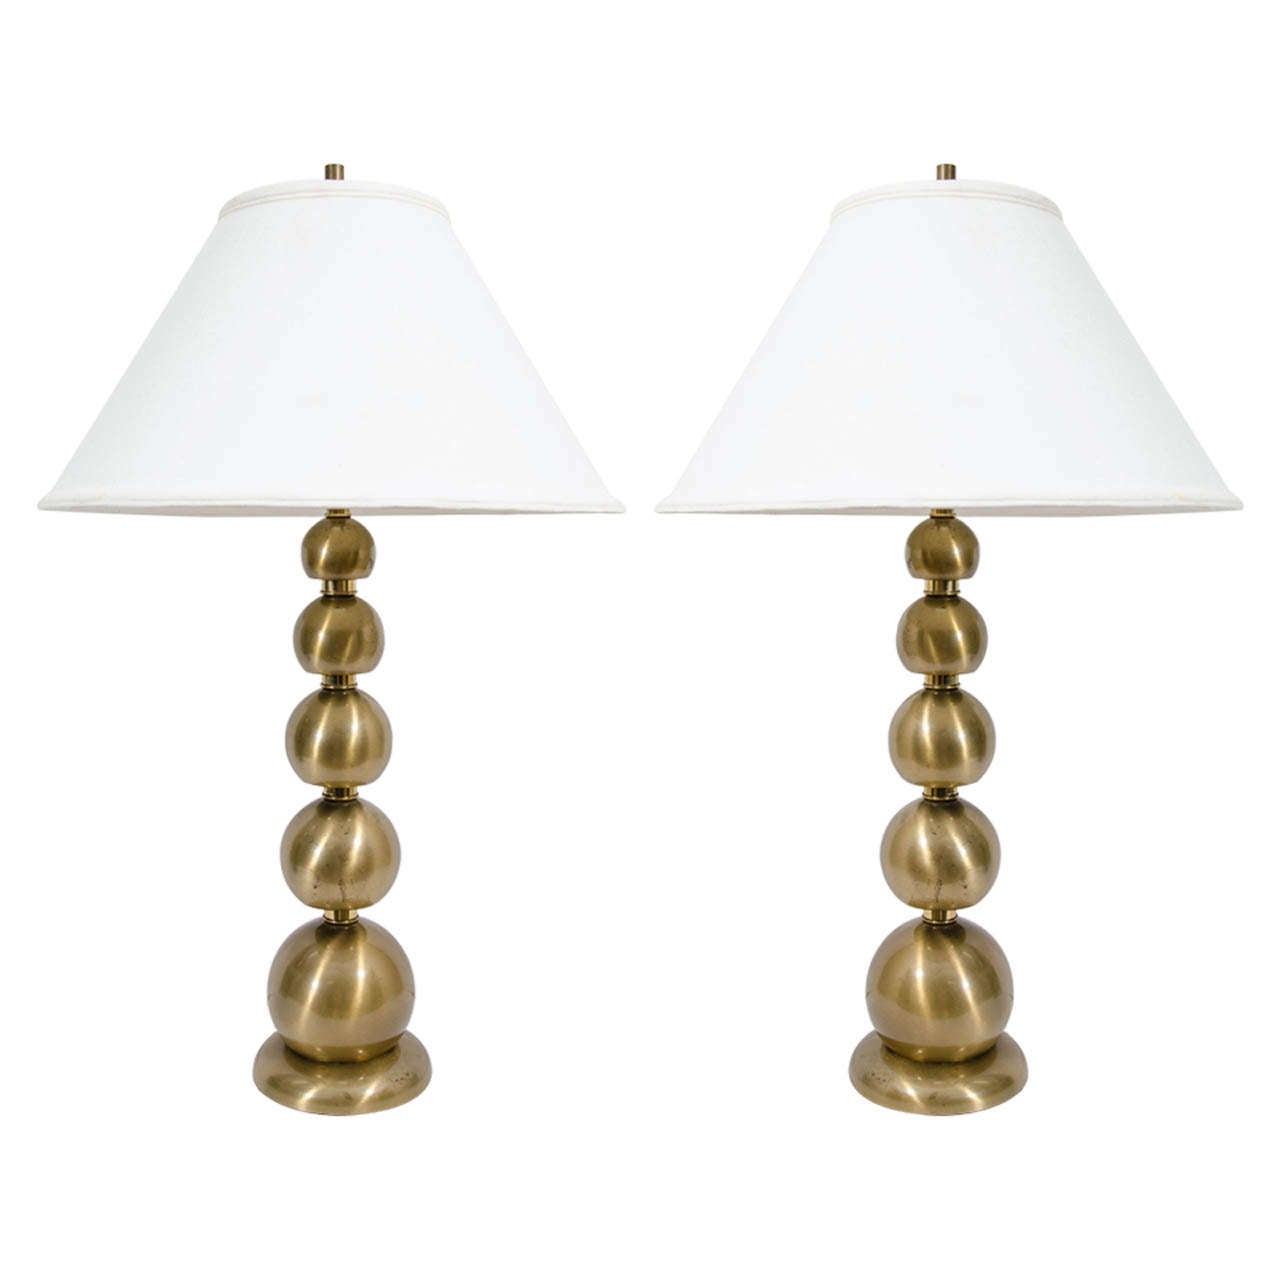 A Mid Century Pair of Brushed Brass Stacked Ball Table Lamps